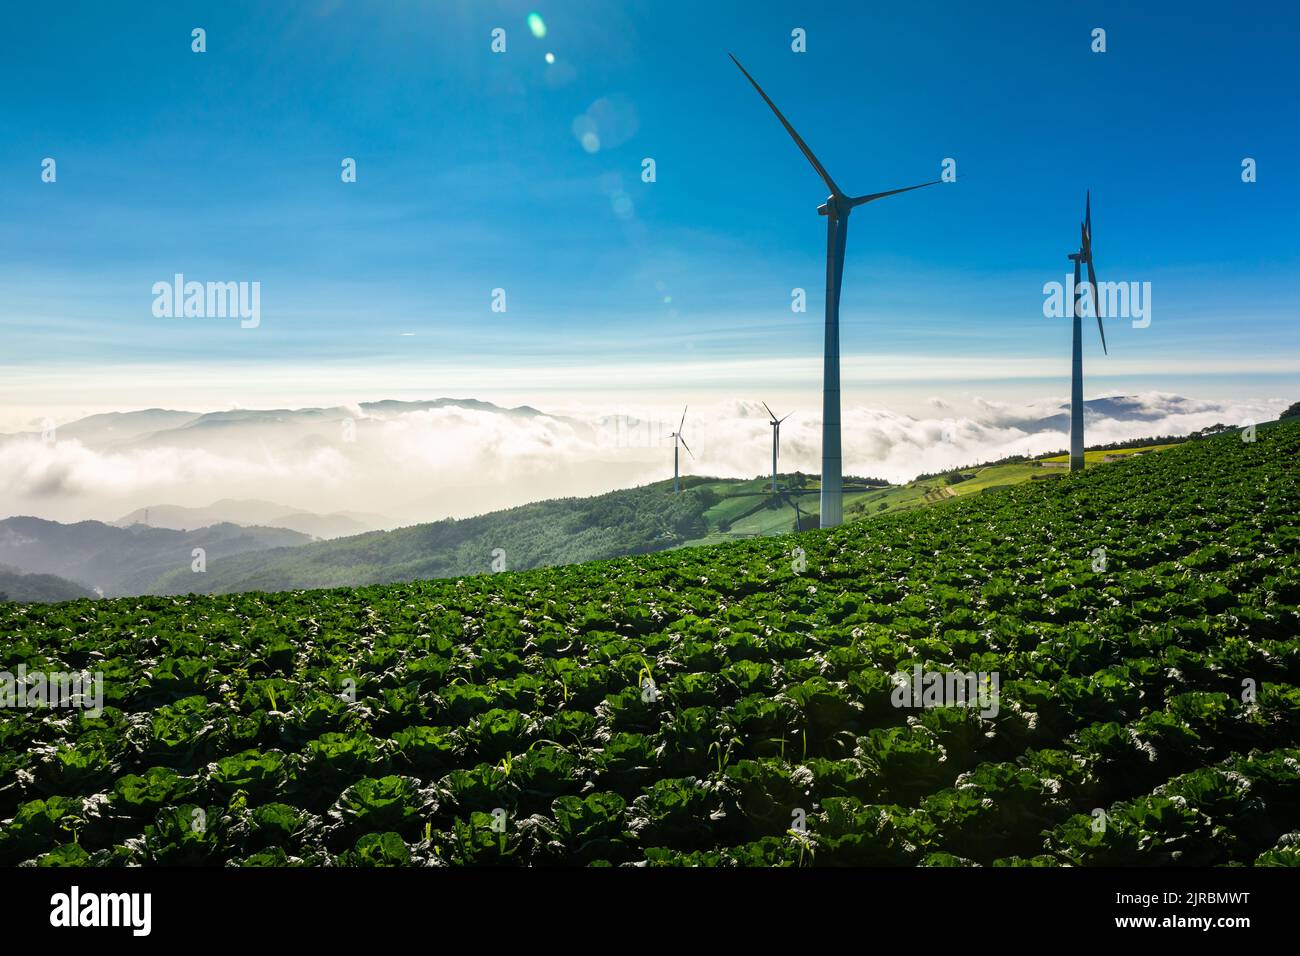 Wind turbine landscape among clouds spreading over mountains in an alpine local cabbage field environment illuminated by morning sunlight. Stock Photo